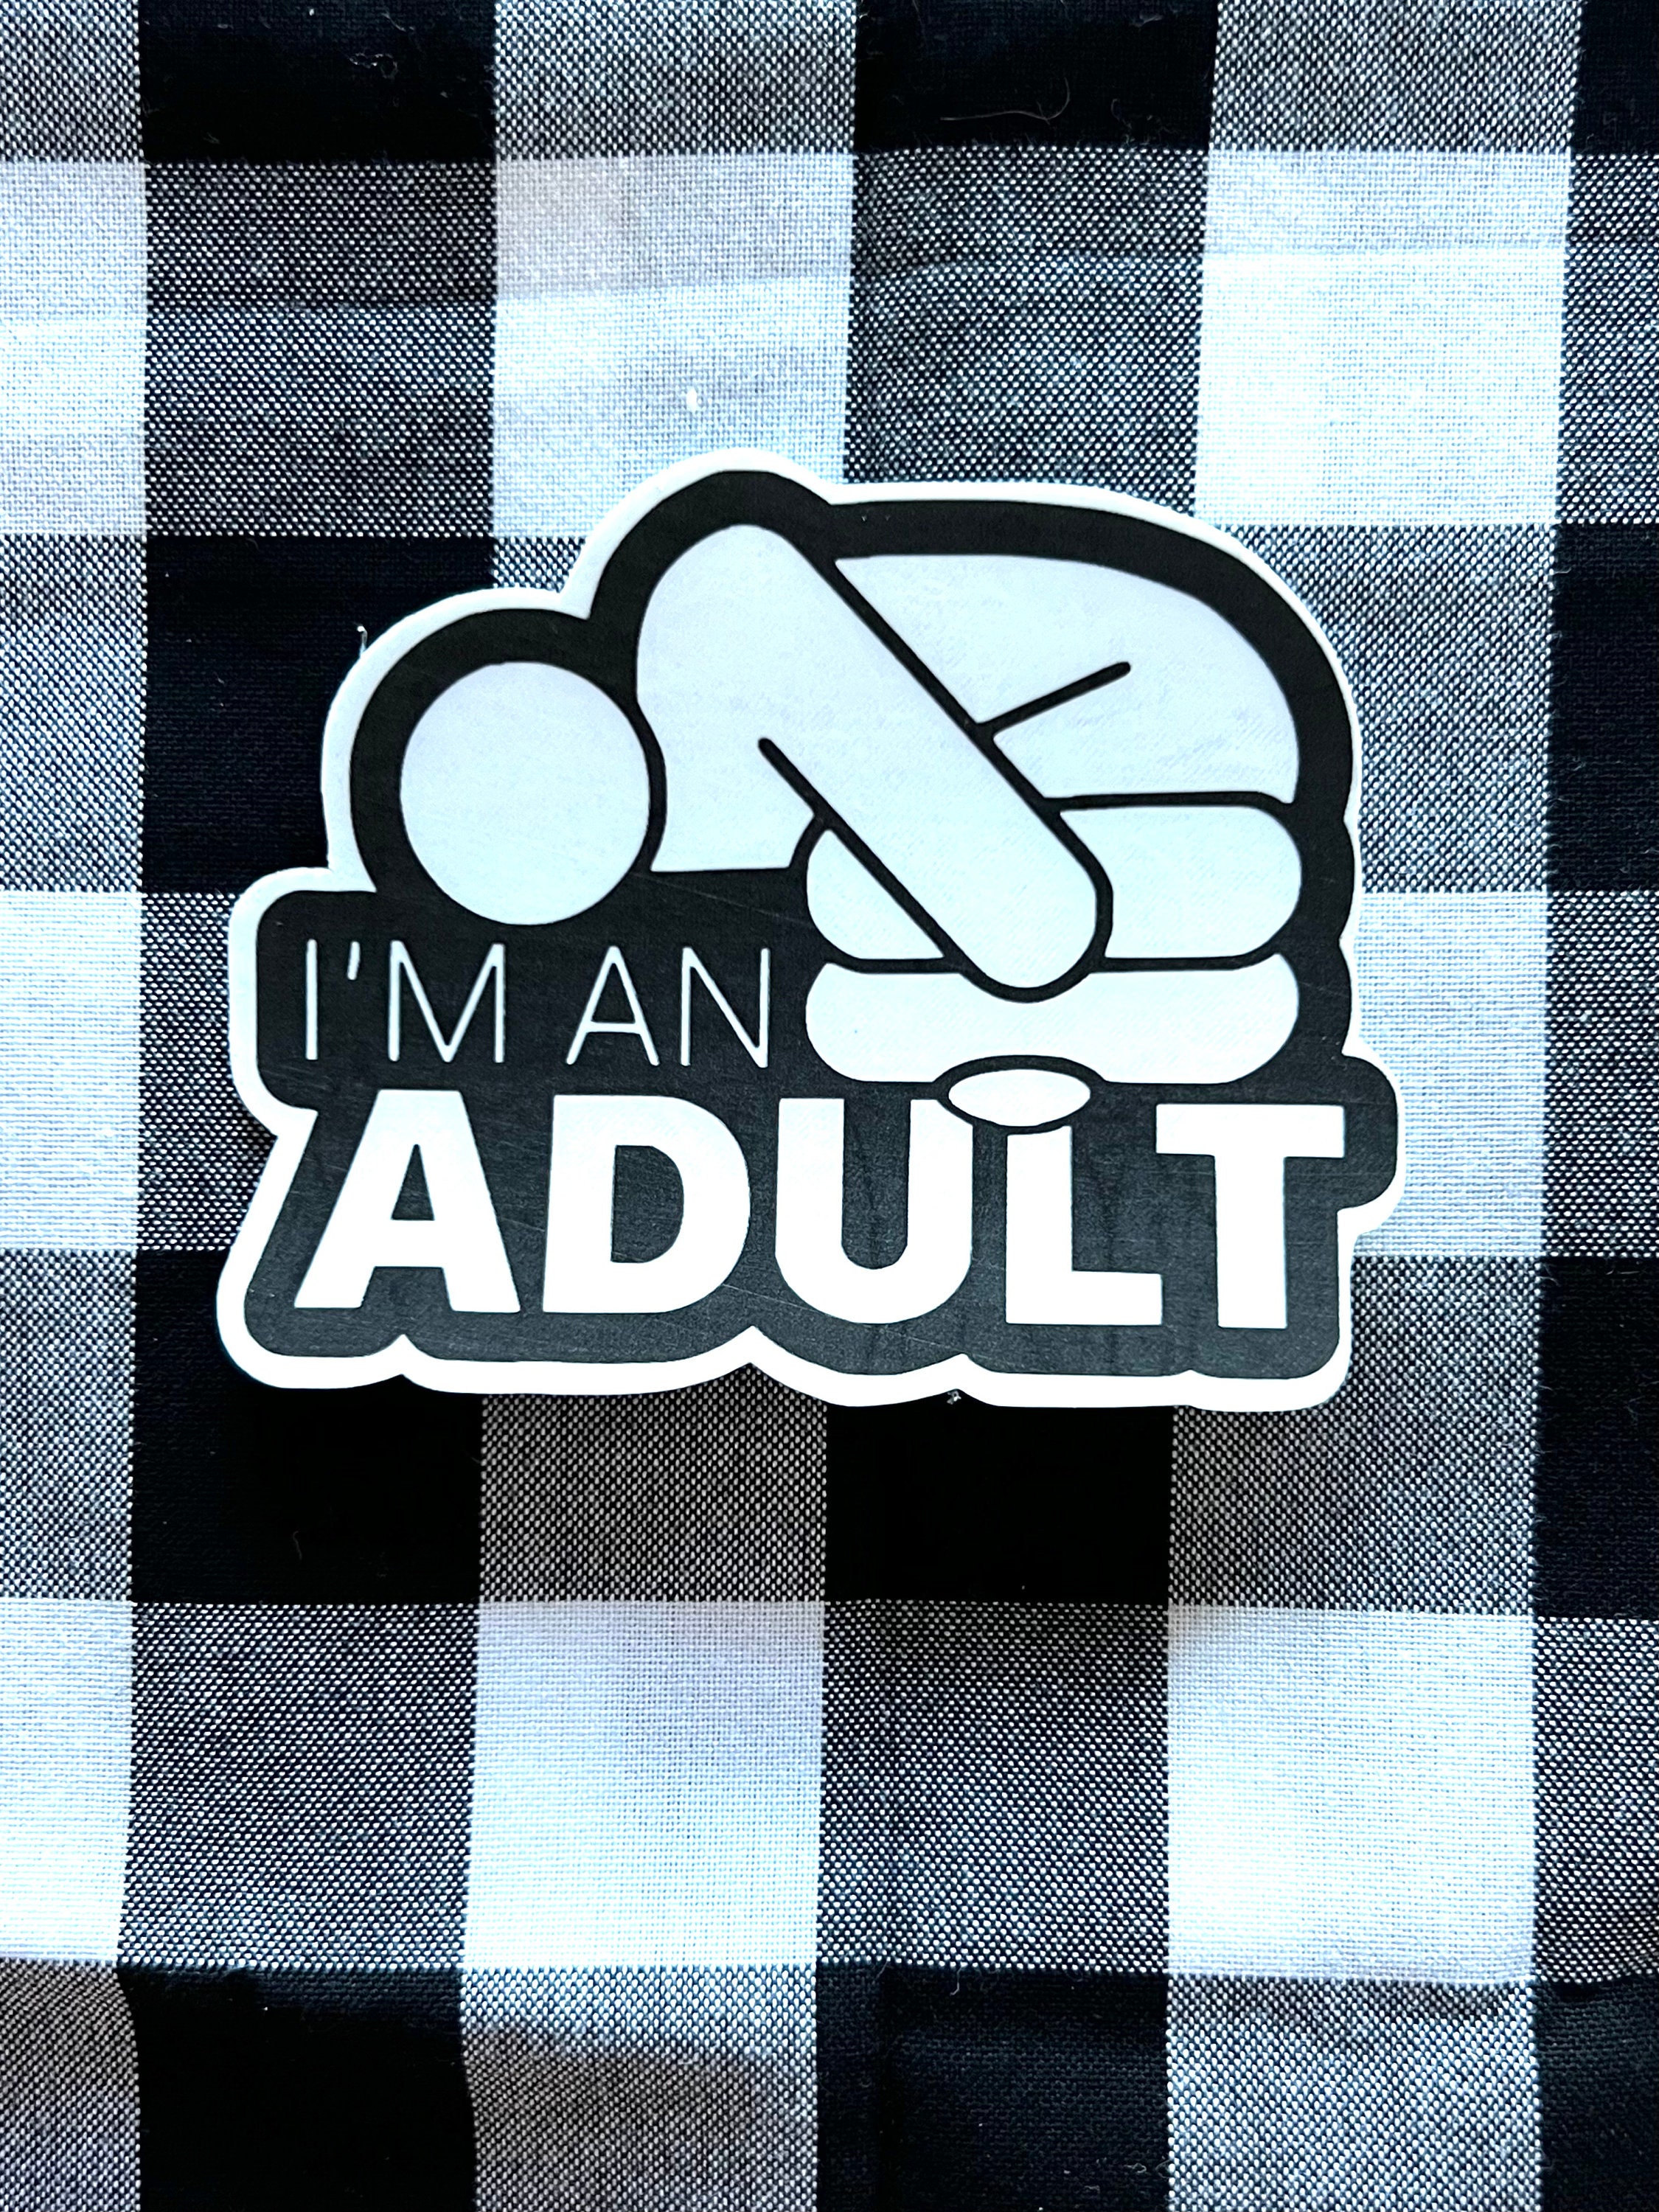 Novelty Adult Stickers/Autocollants Because Adulting is Hard 18 Pc